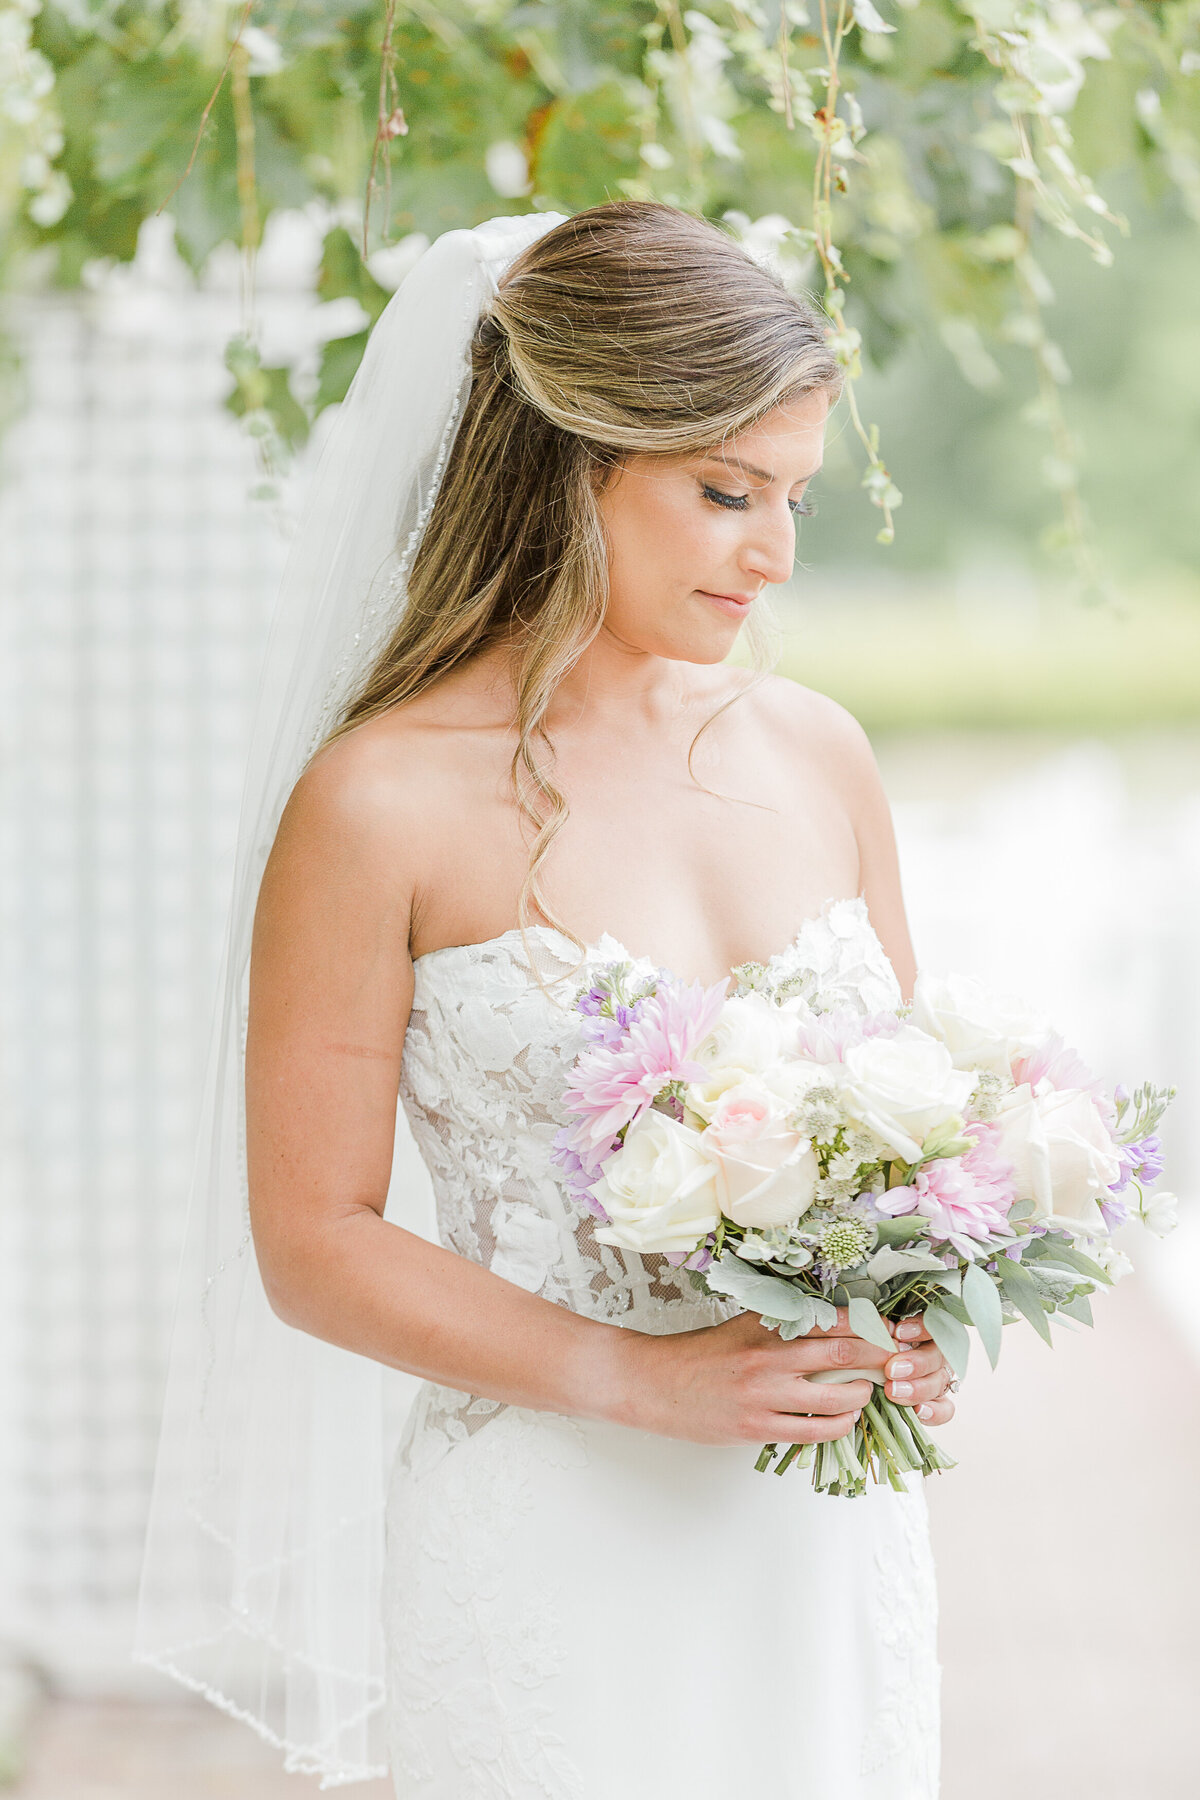 Formal bridal portrait. A bride is looking down at her bouquet. Captured by best Massachusetts wedding photographer Lia Rose Weddings.